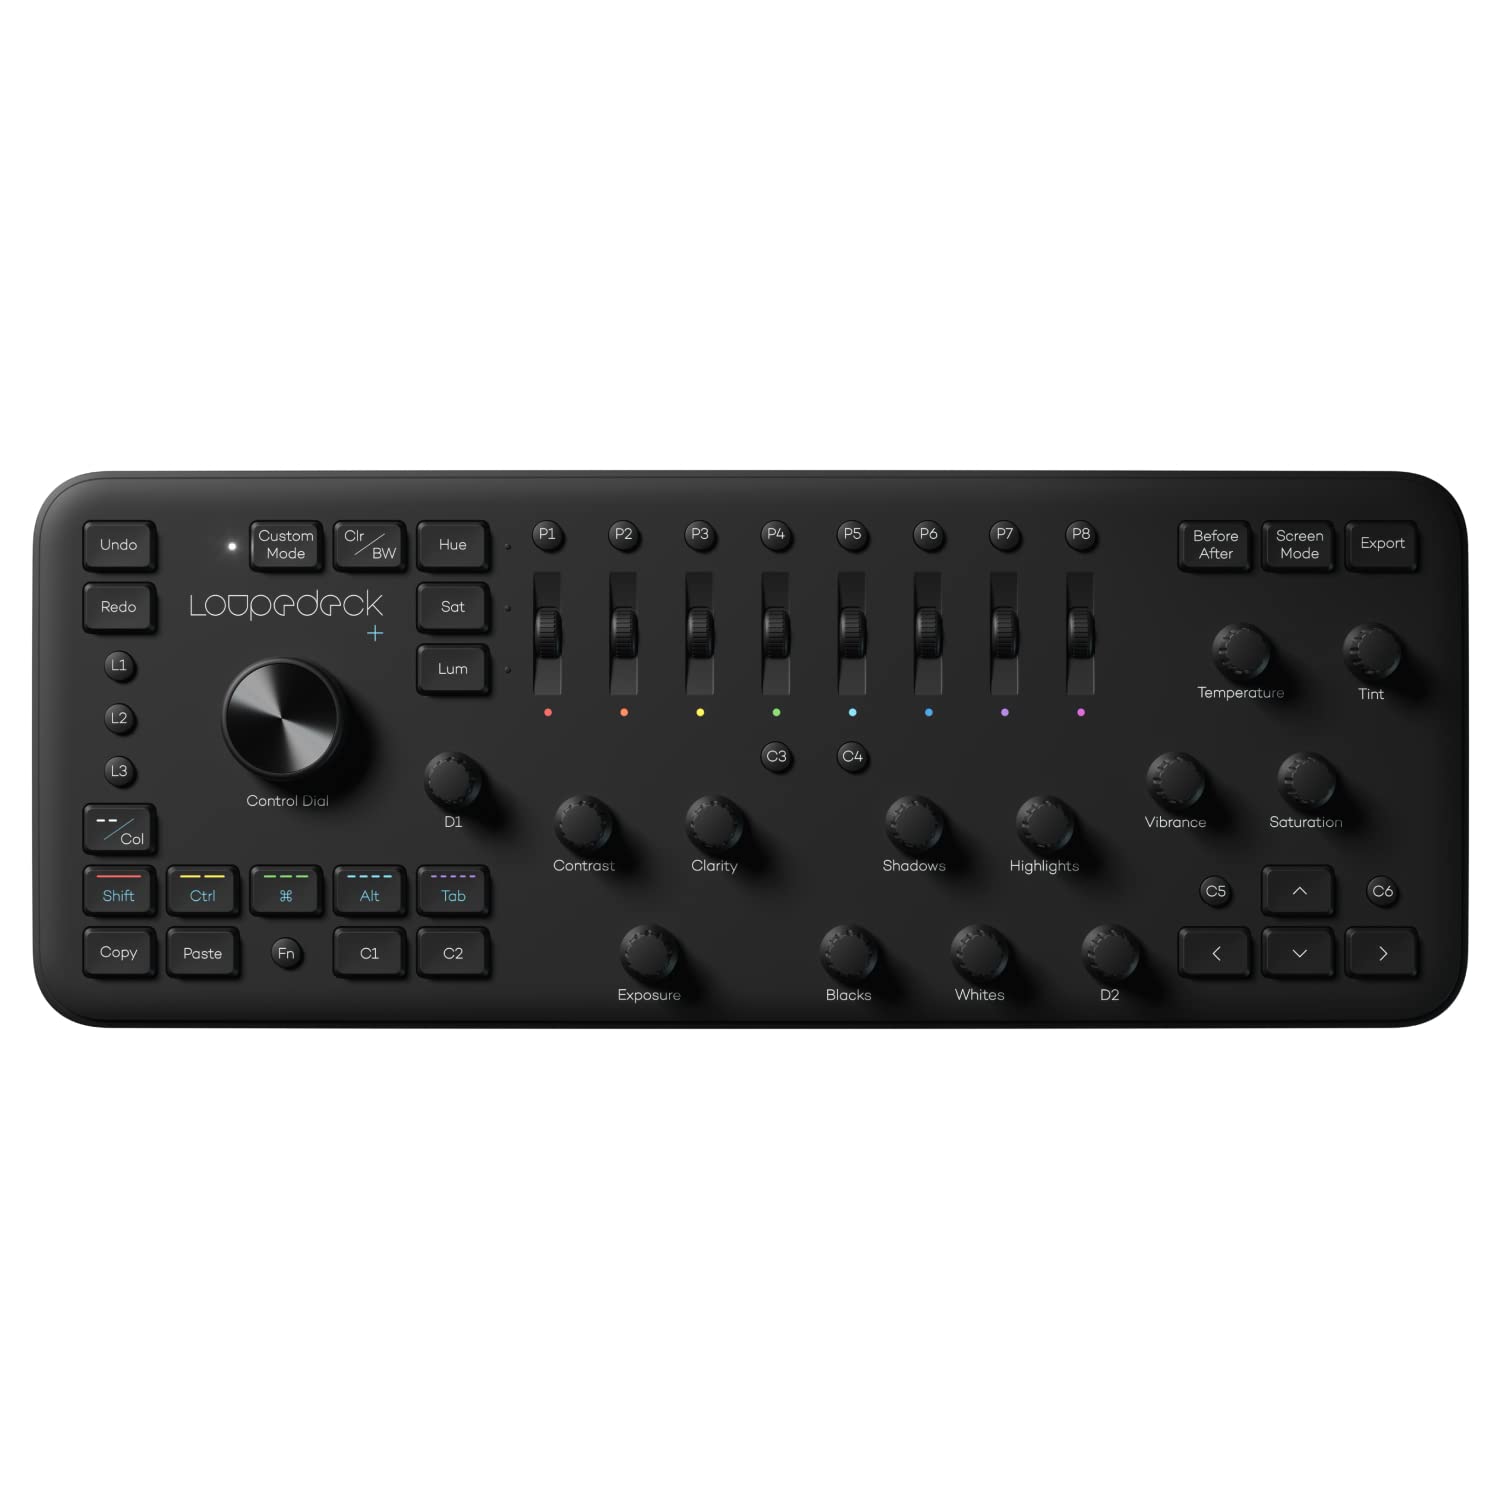 Loupedeck+ The Photo and Video Editing Console for Lightroom Classic, Premiere Pro, Final Cut Pro, Photoshop with Camera Raw, After Effects, Audition and More.